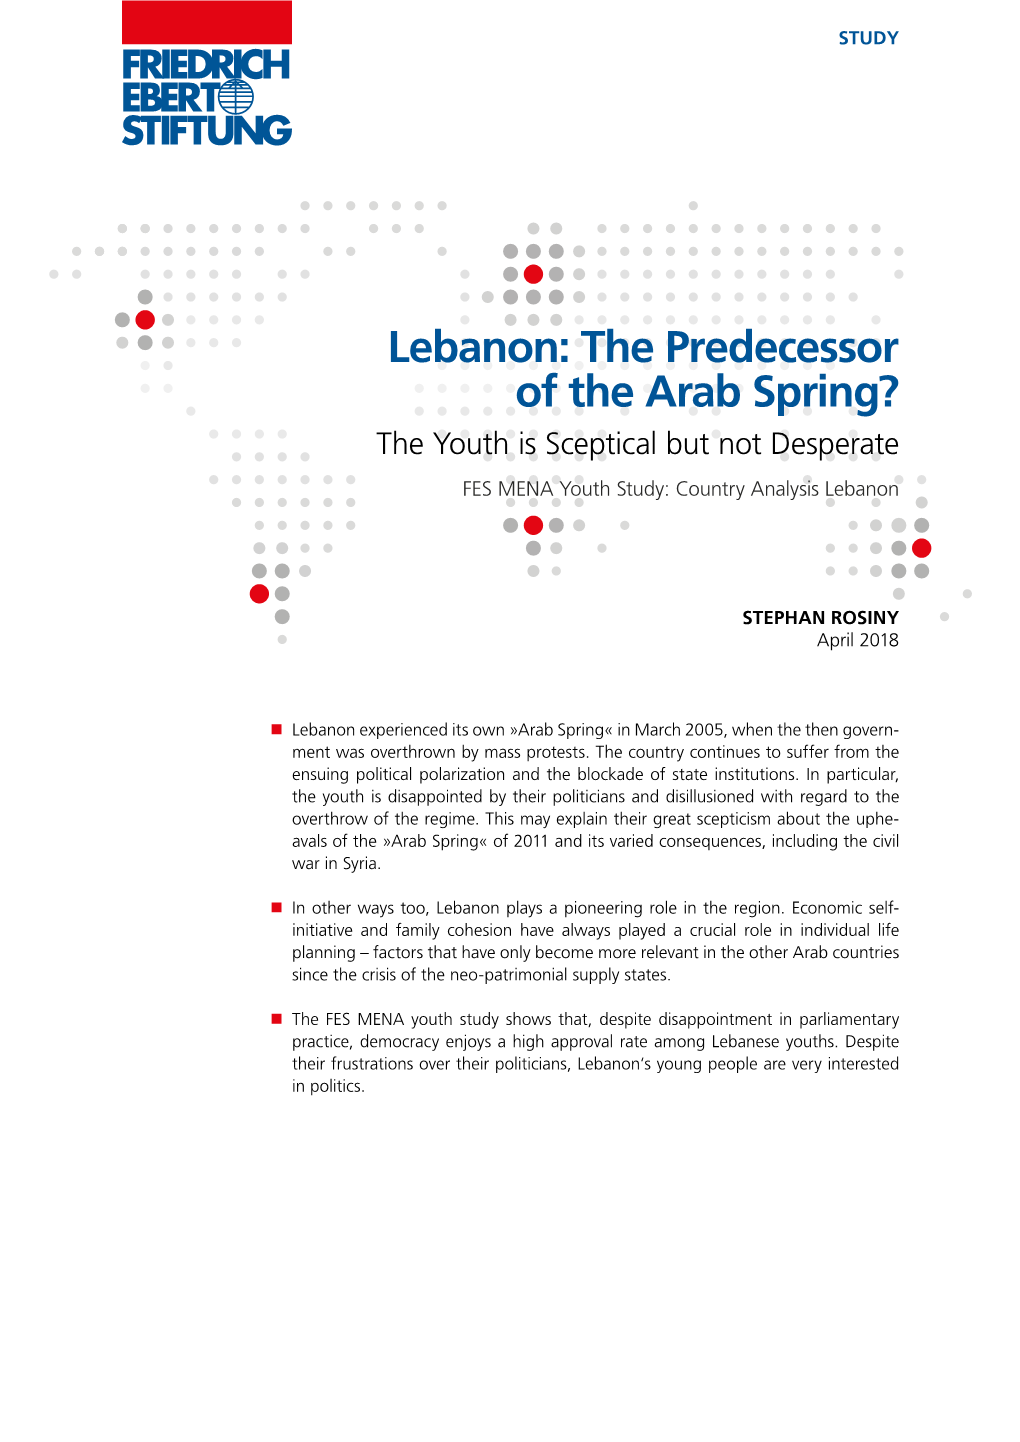 Lebanon: the Predecessor of the Arab Spring? the Youth Is Sceptical but Not Desperate FES MENA Youth Study: Country Analysis Lebanon